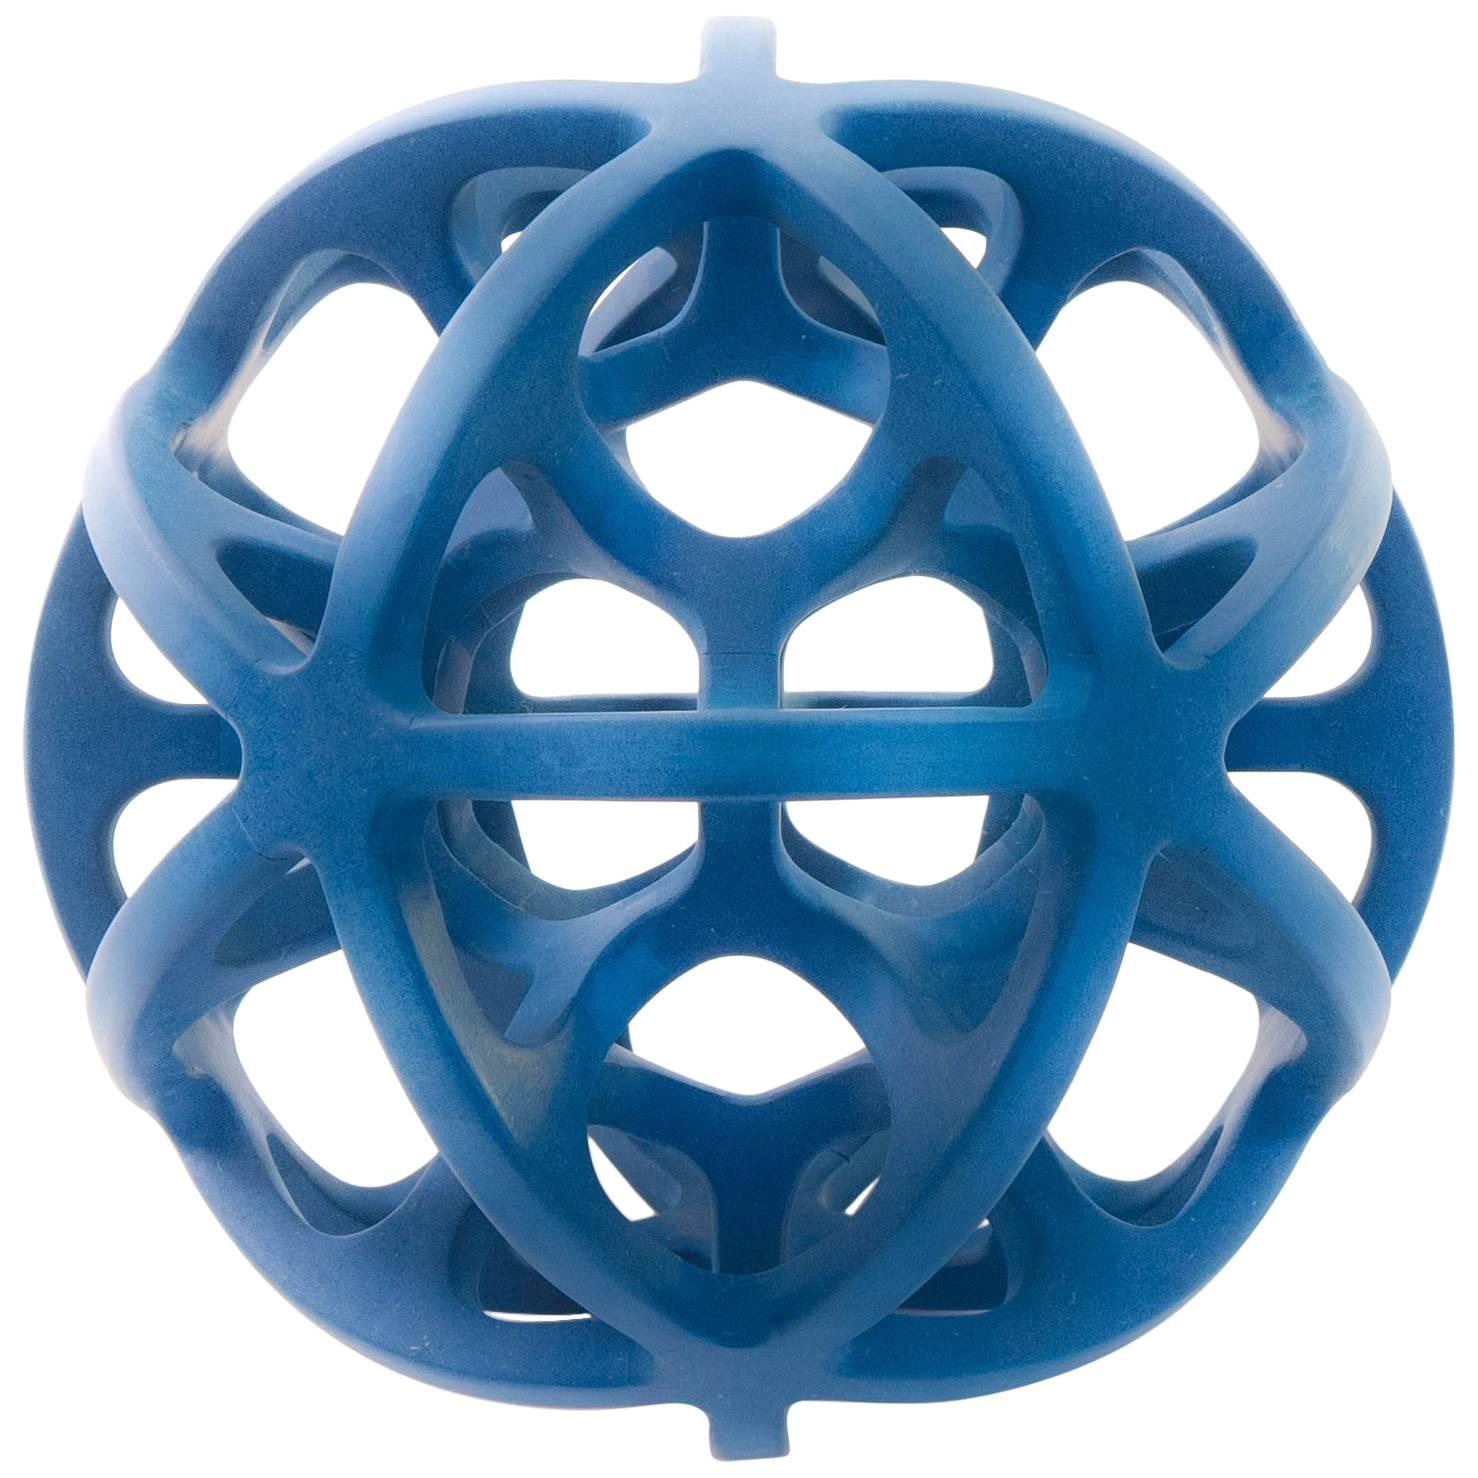 Contemporary Mexican Geometric Dual Icosahedron Handcrafted Sphere Sculpture For Sale